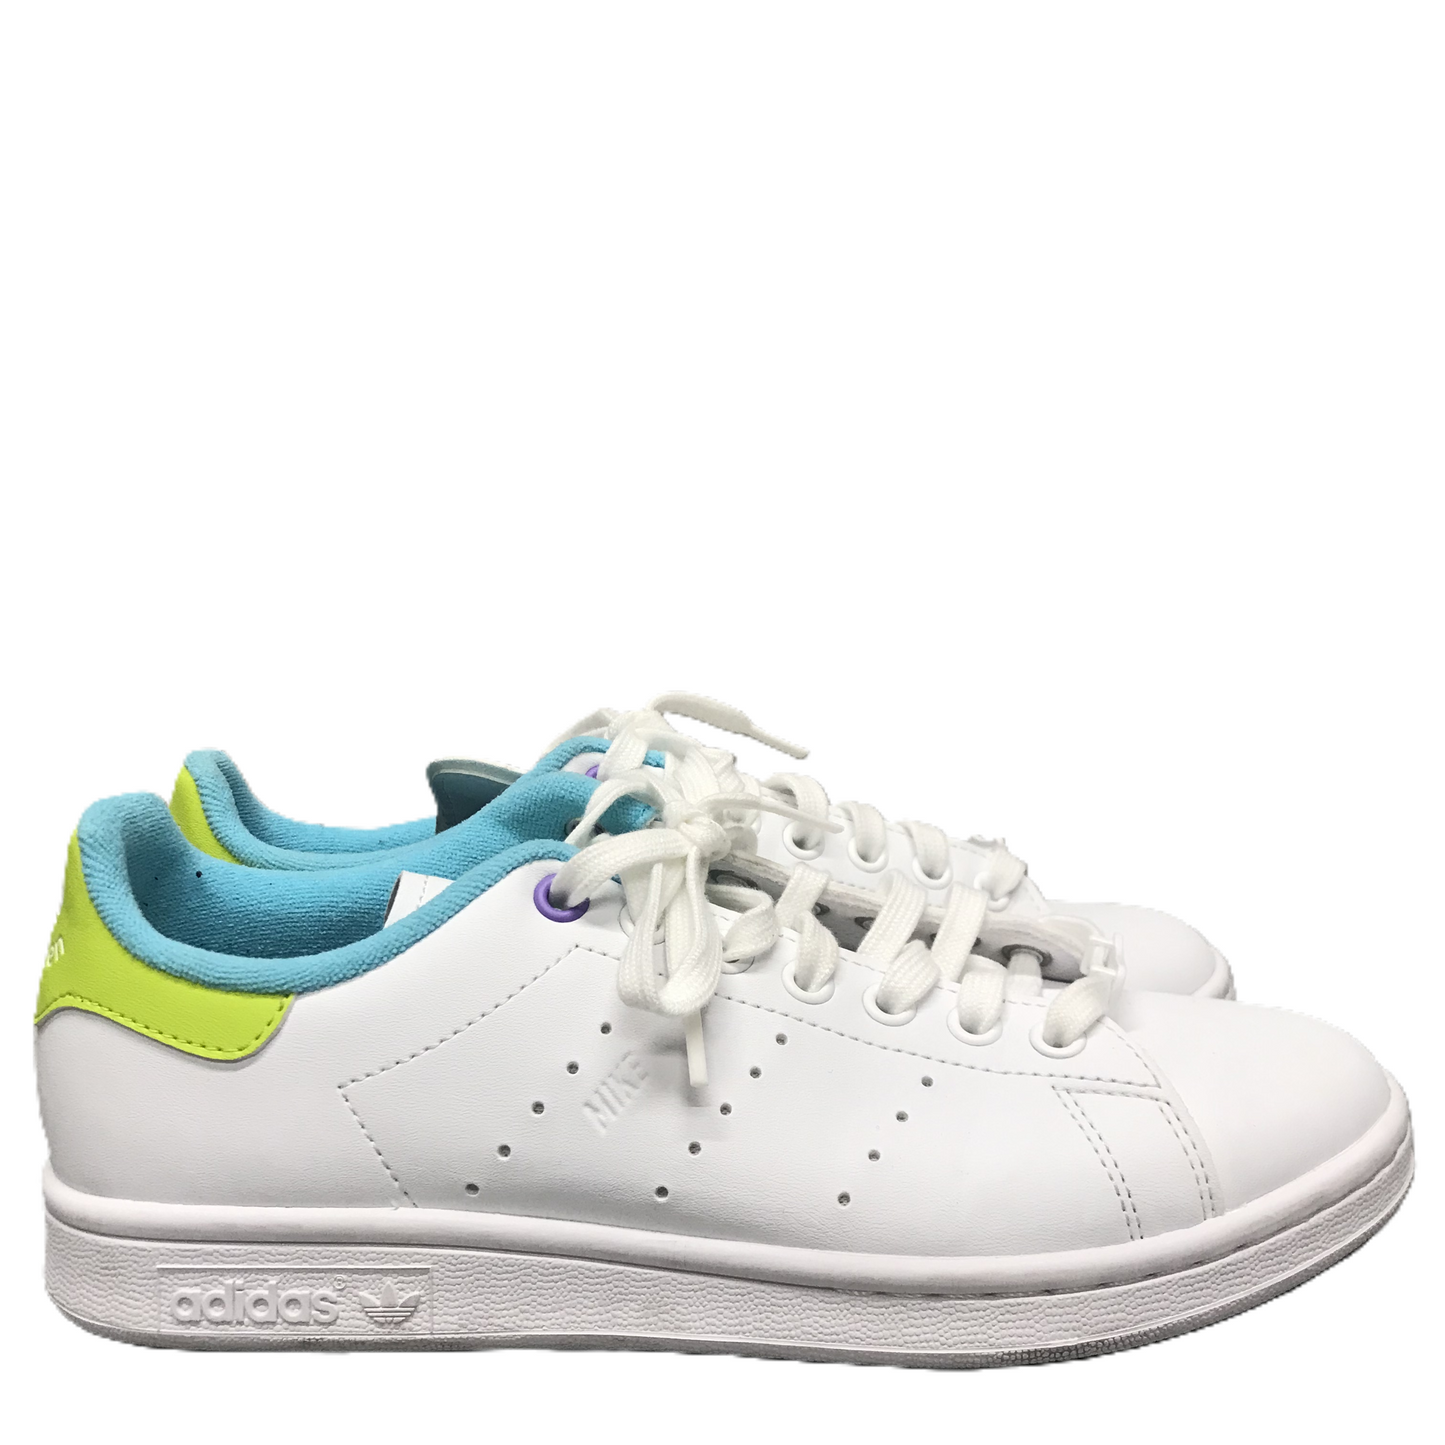 White Shoes Athletic By Adidas, Size: 6.5